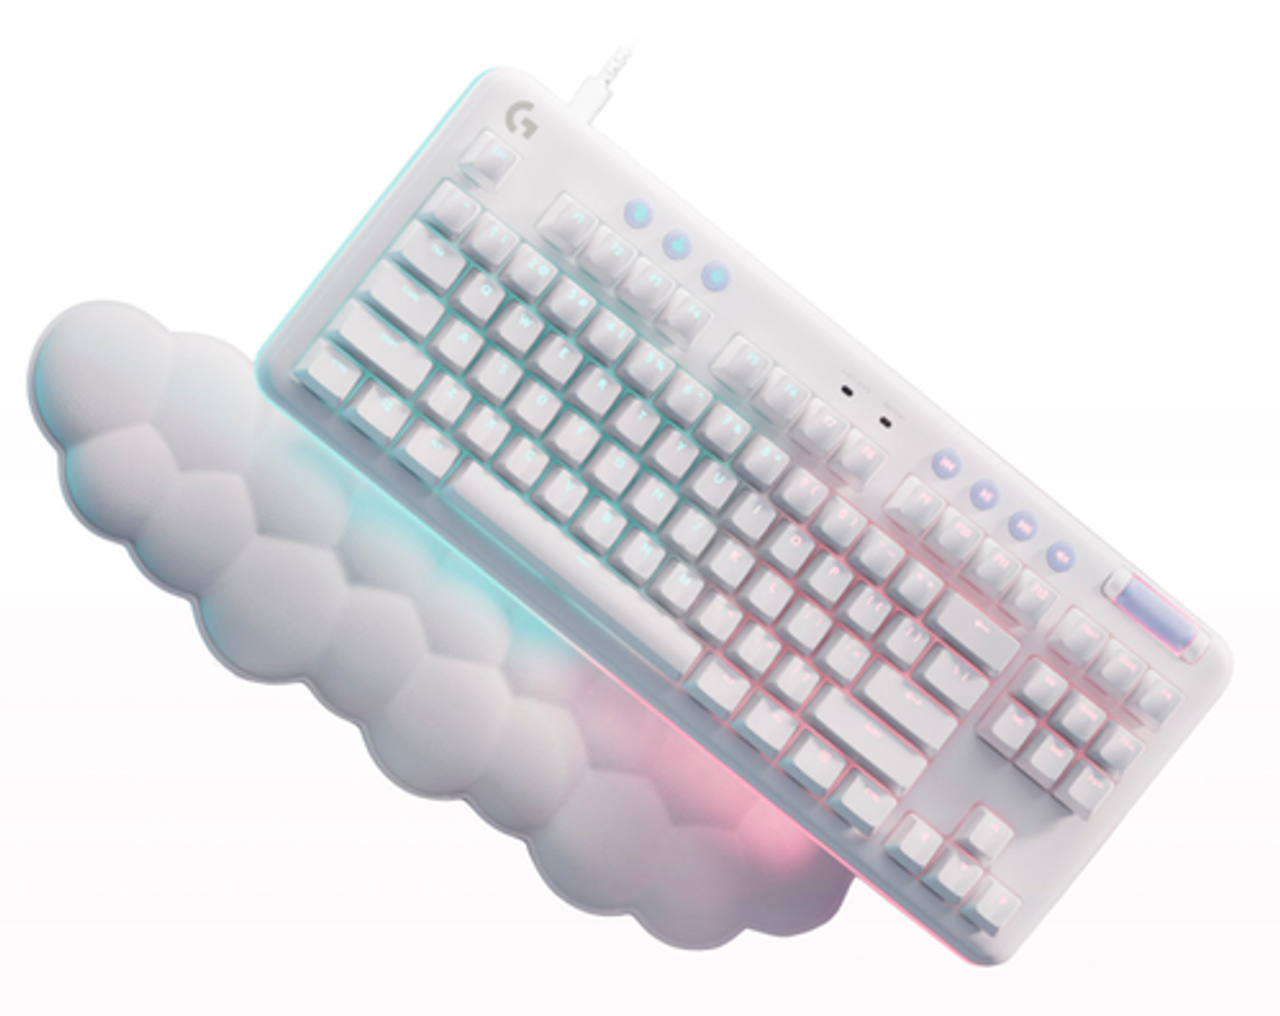 Logitech - G713 TKL Wired Mechanical Clicky Switch Gaming Keyboard for PC/Mac with Palm Rest Included - White Mist